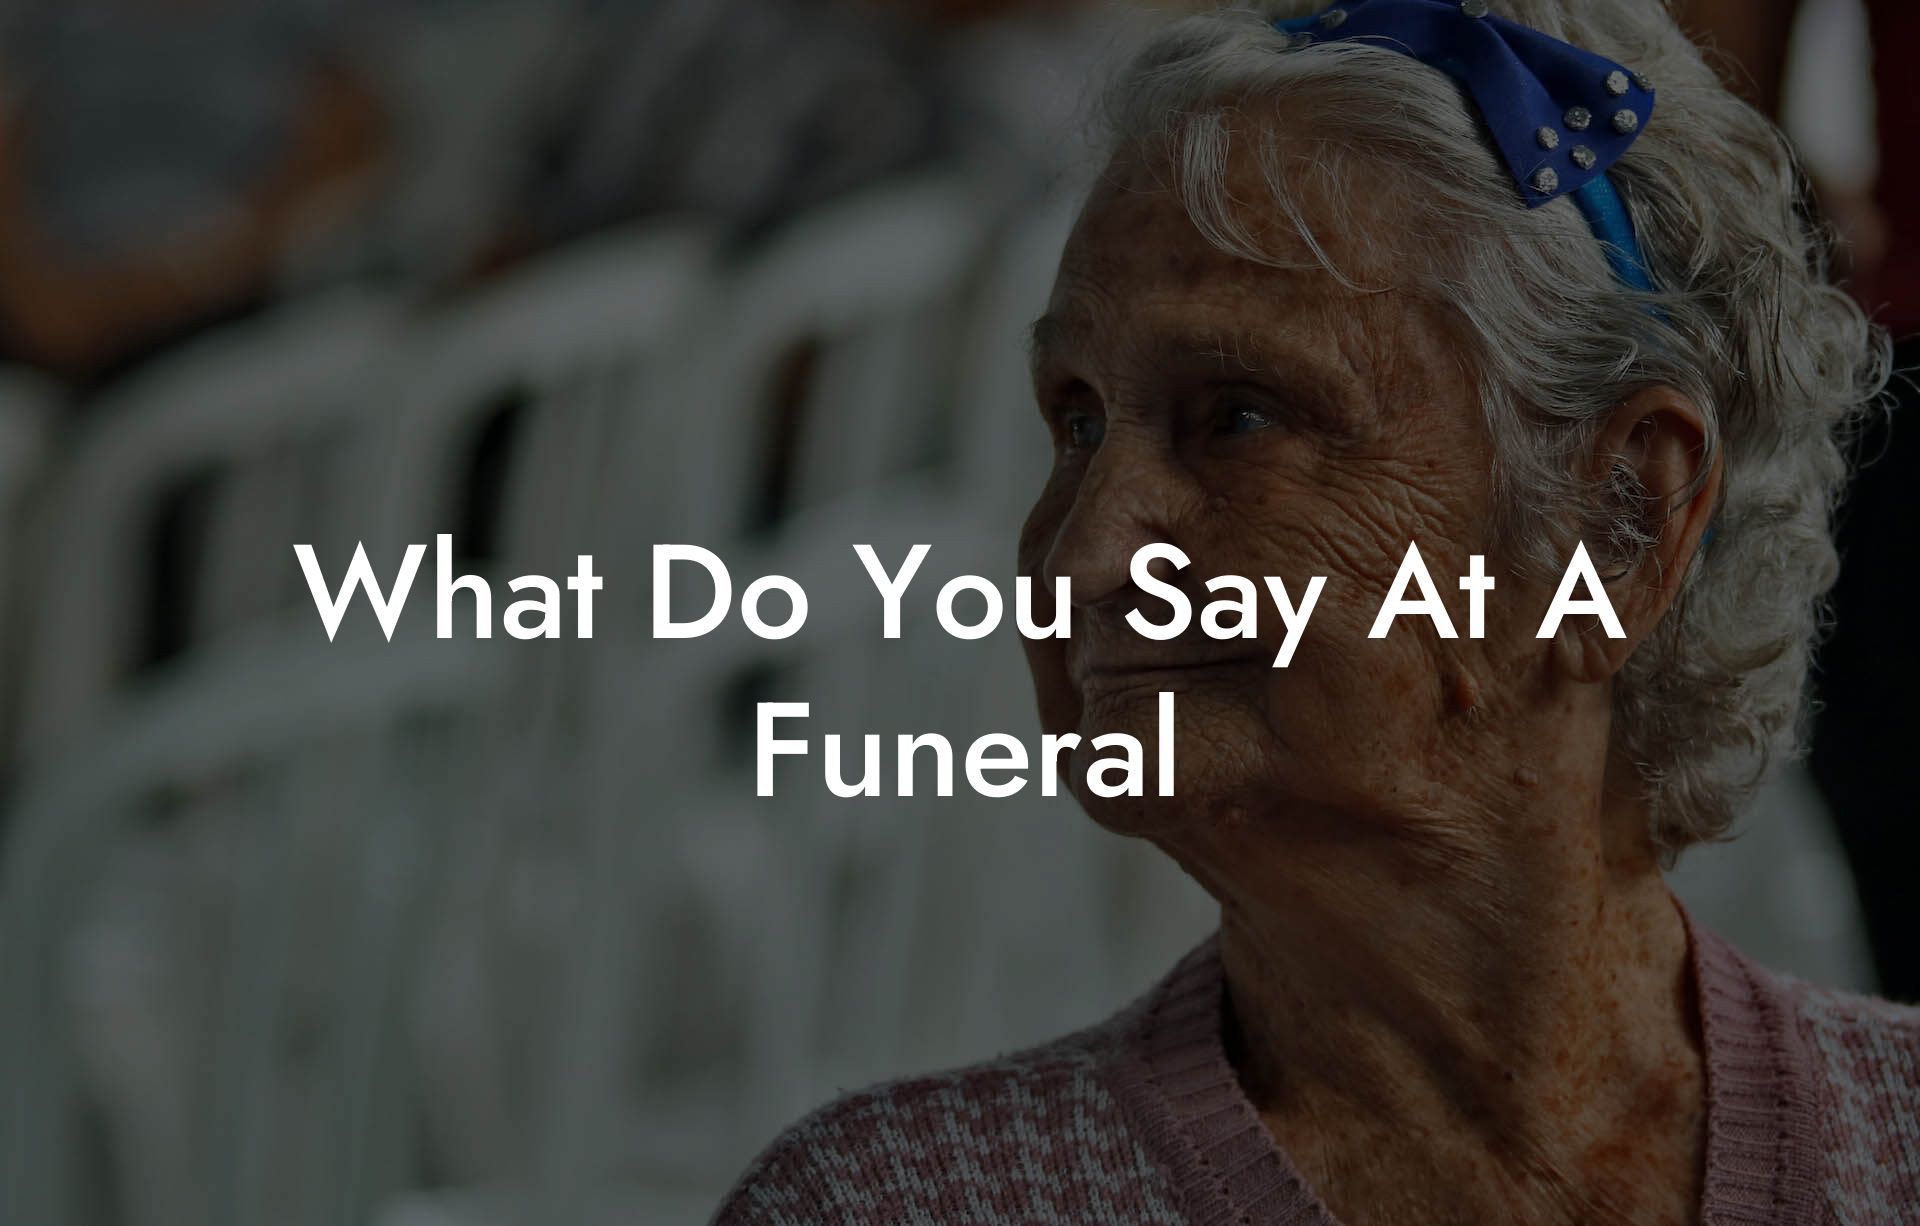 What Do You Say At A Funeral